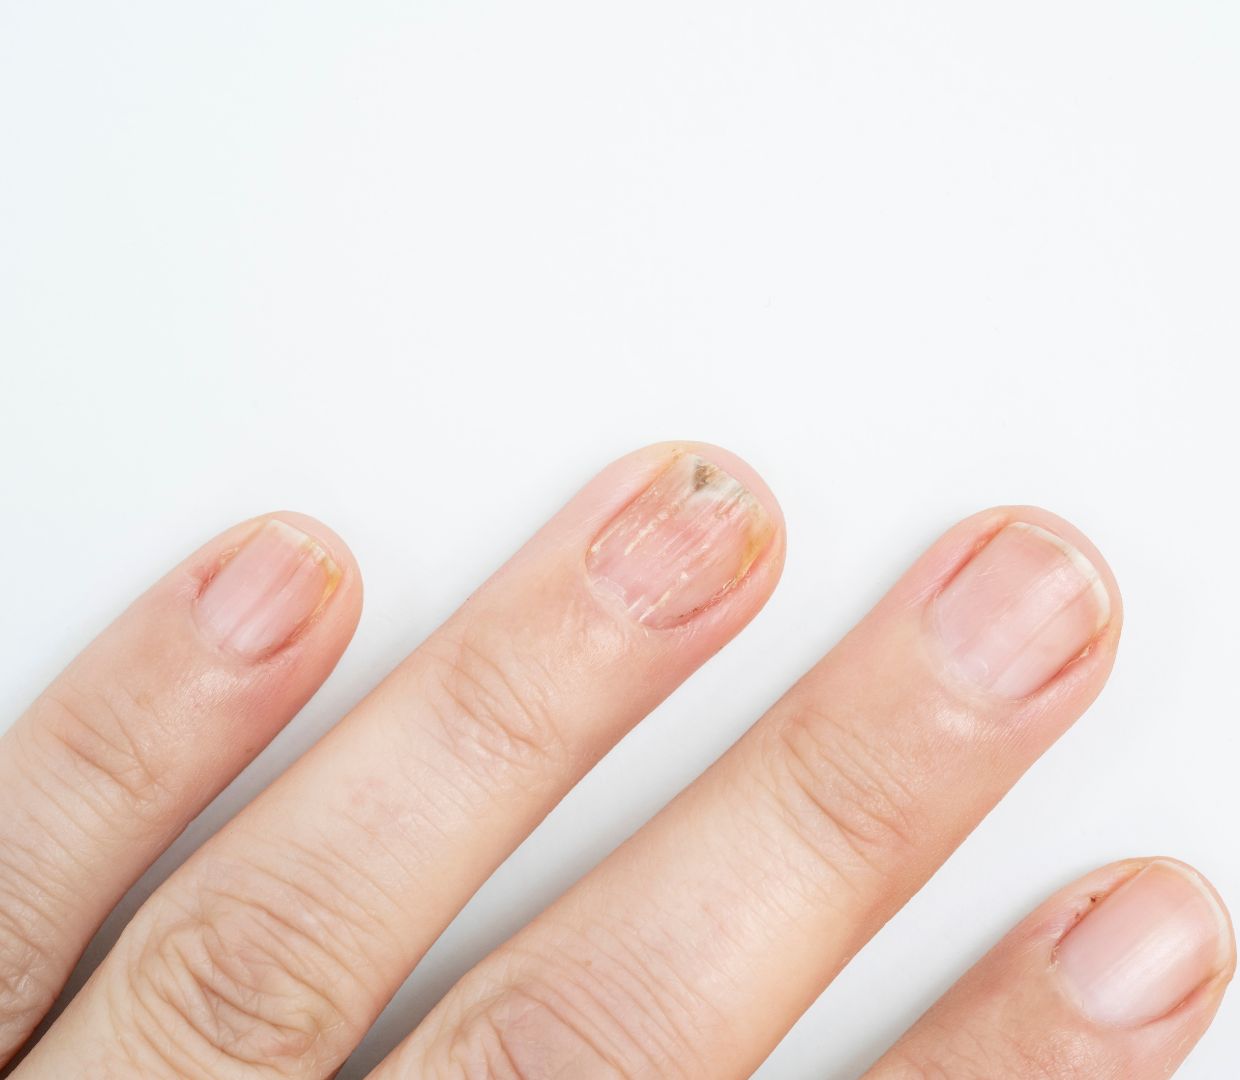 Is biting nails harmful for health? Here's what experts say | Health News -  The Indian Express